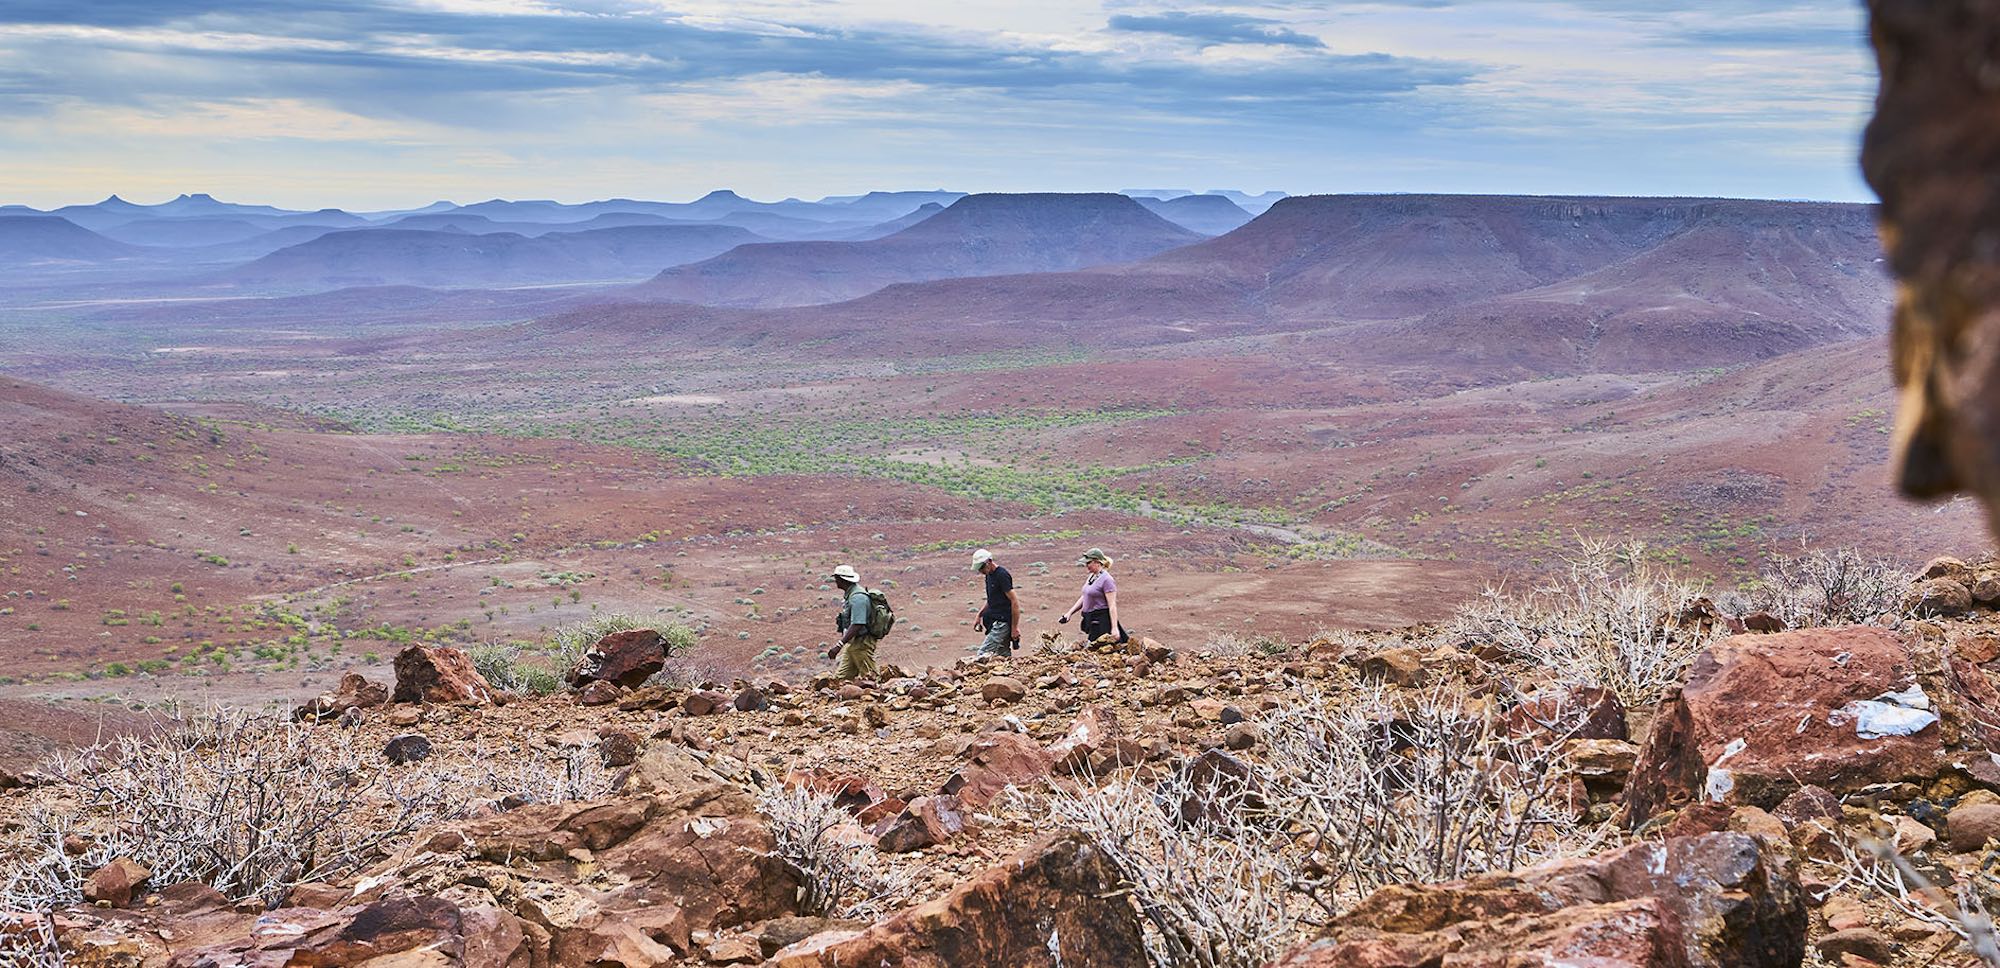 A guide leads three tourists along a rocky trail overlooking the stunning scenery of northern Namibia.